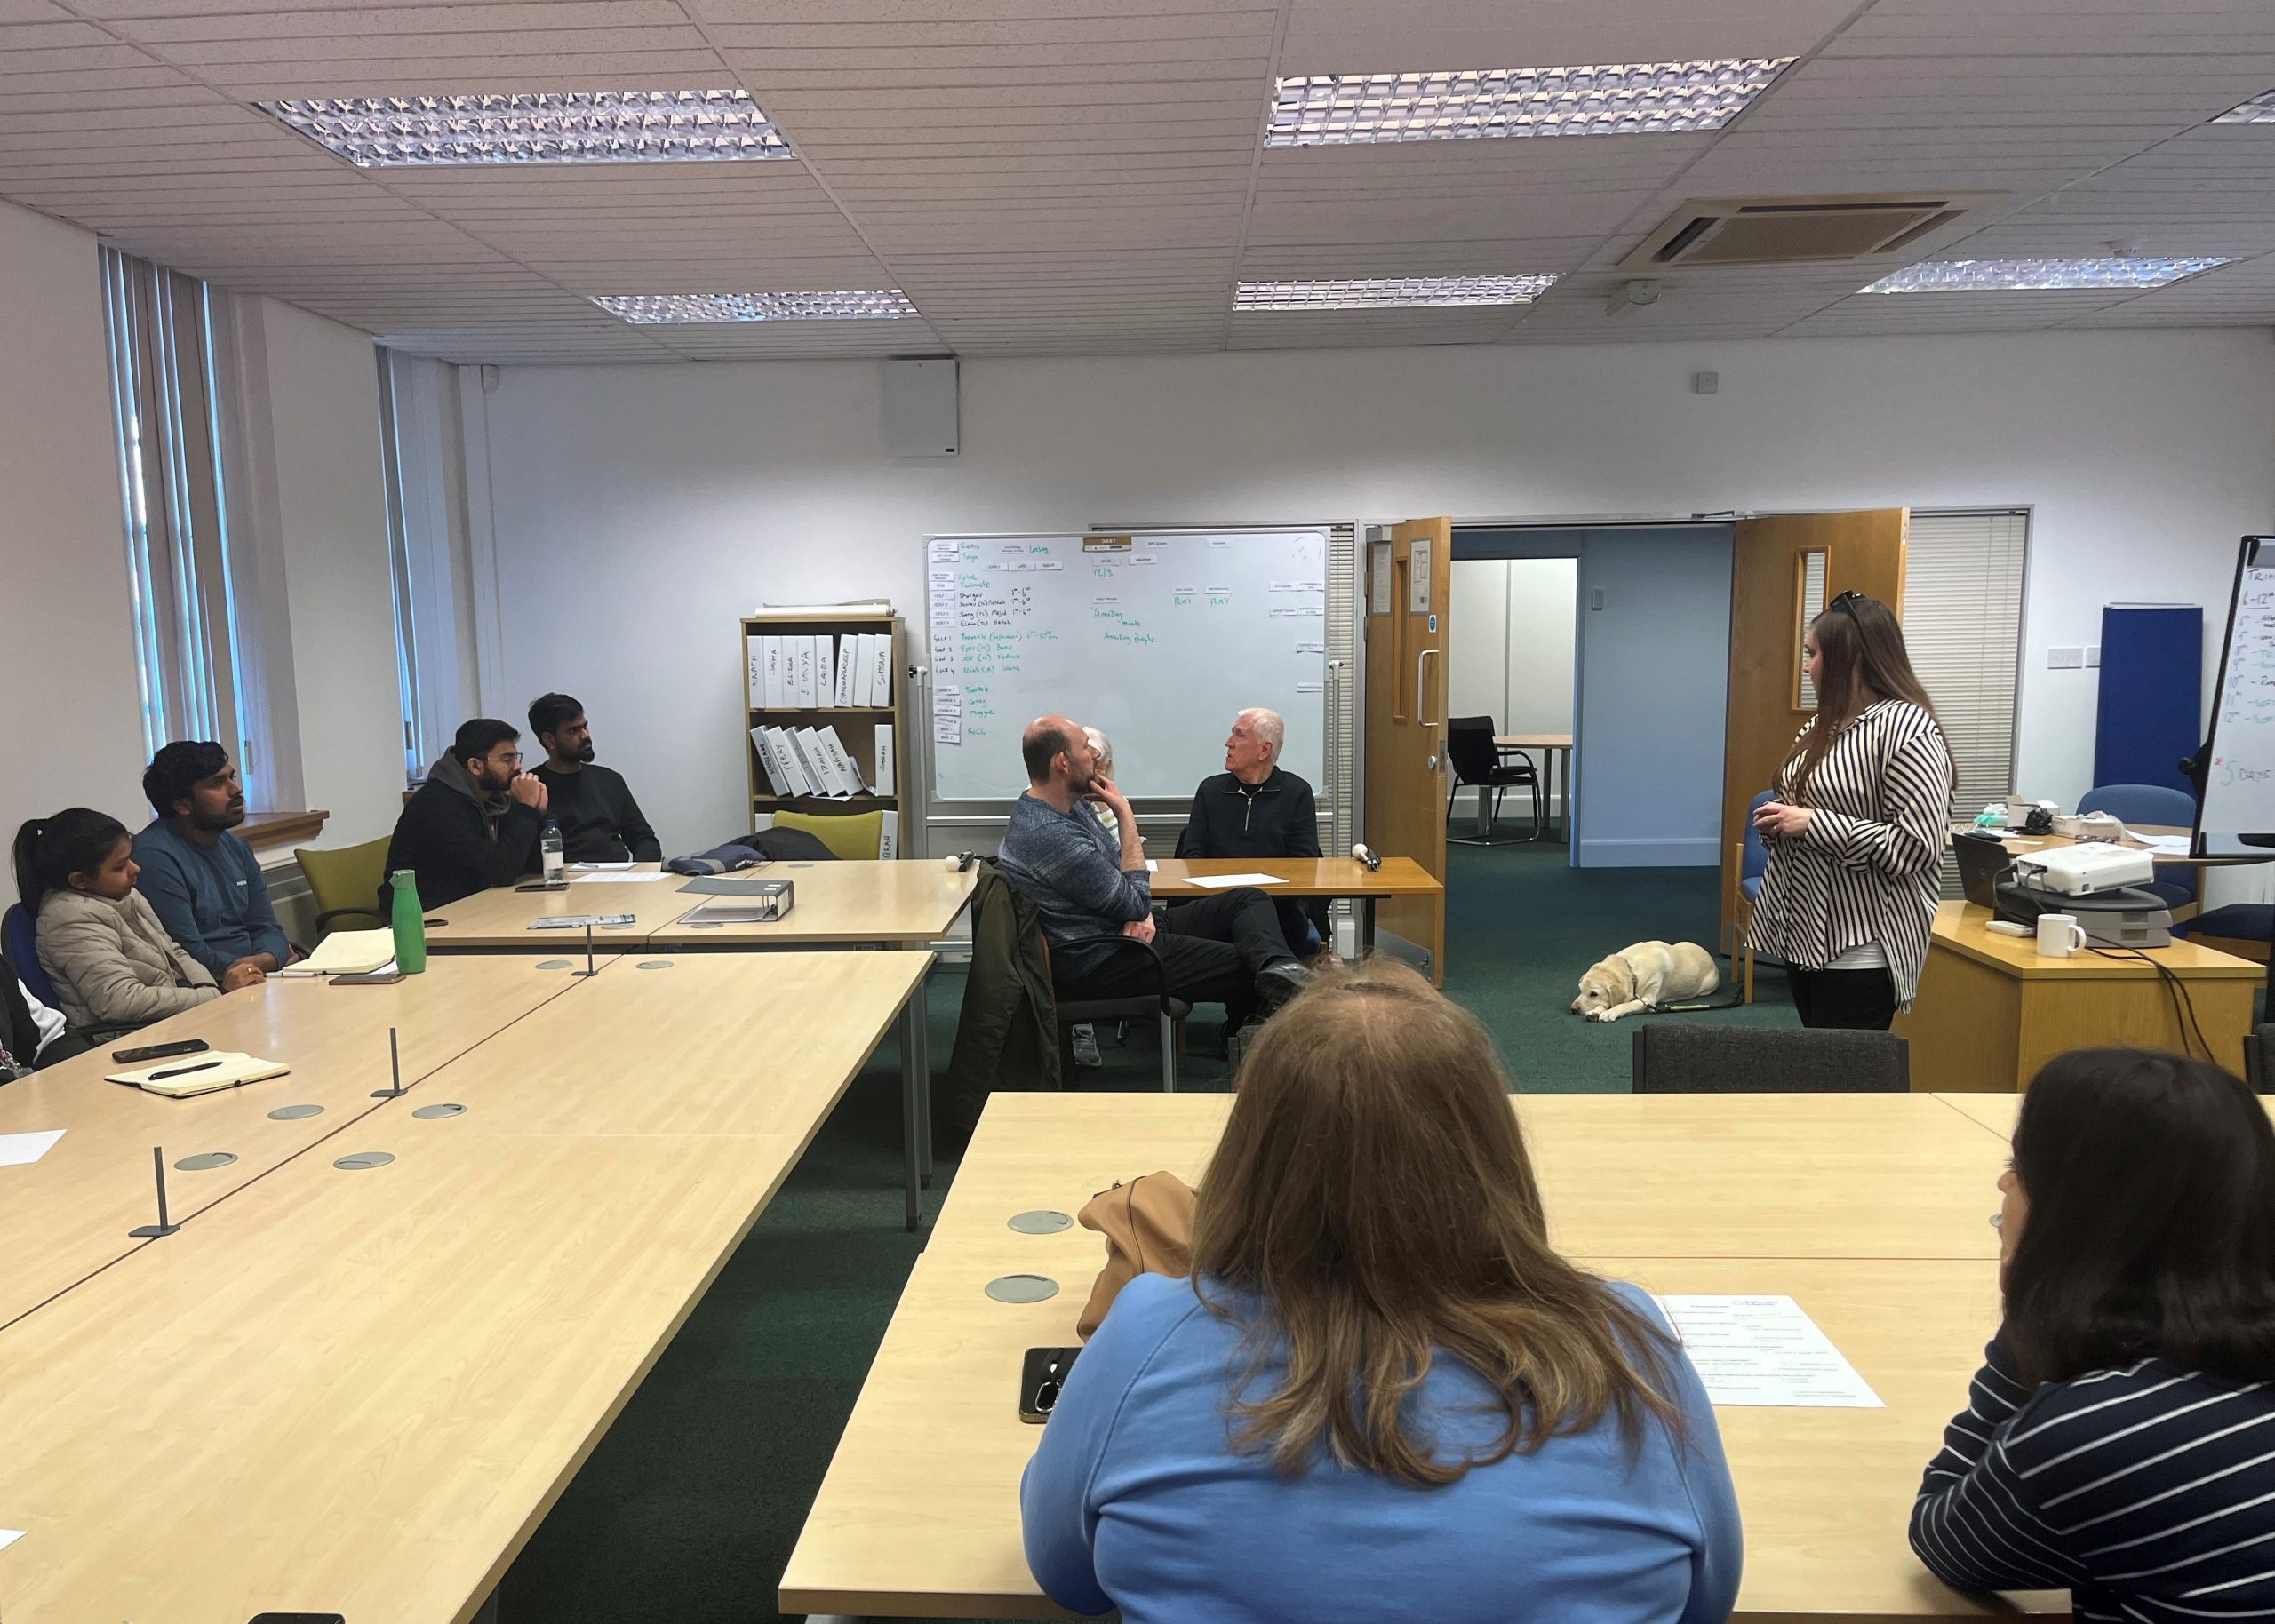 Engagement Manager, Samantha, is stood in front of Ethos Farm Staff, presenting the vision awareness session. Guide dog Lizzie is laying on the floor near her feet.